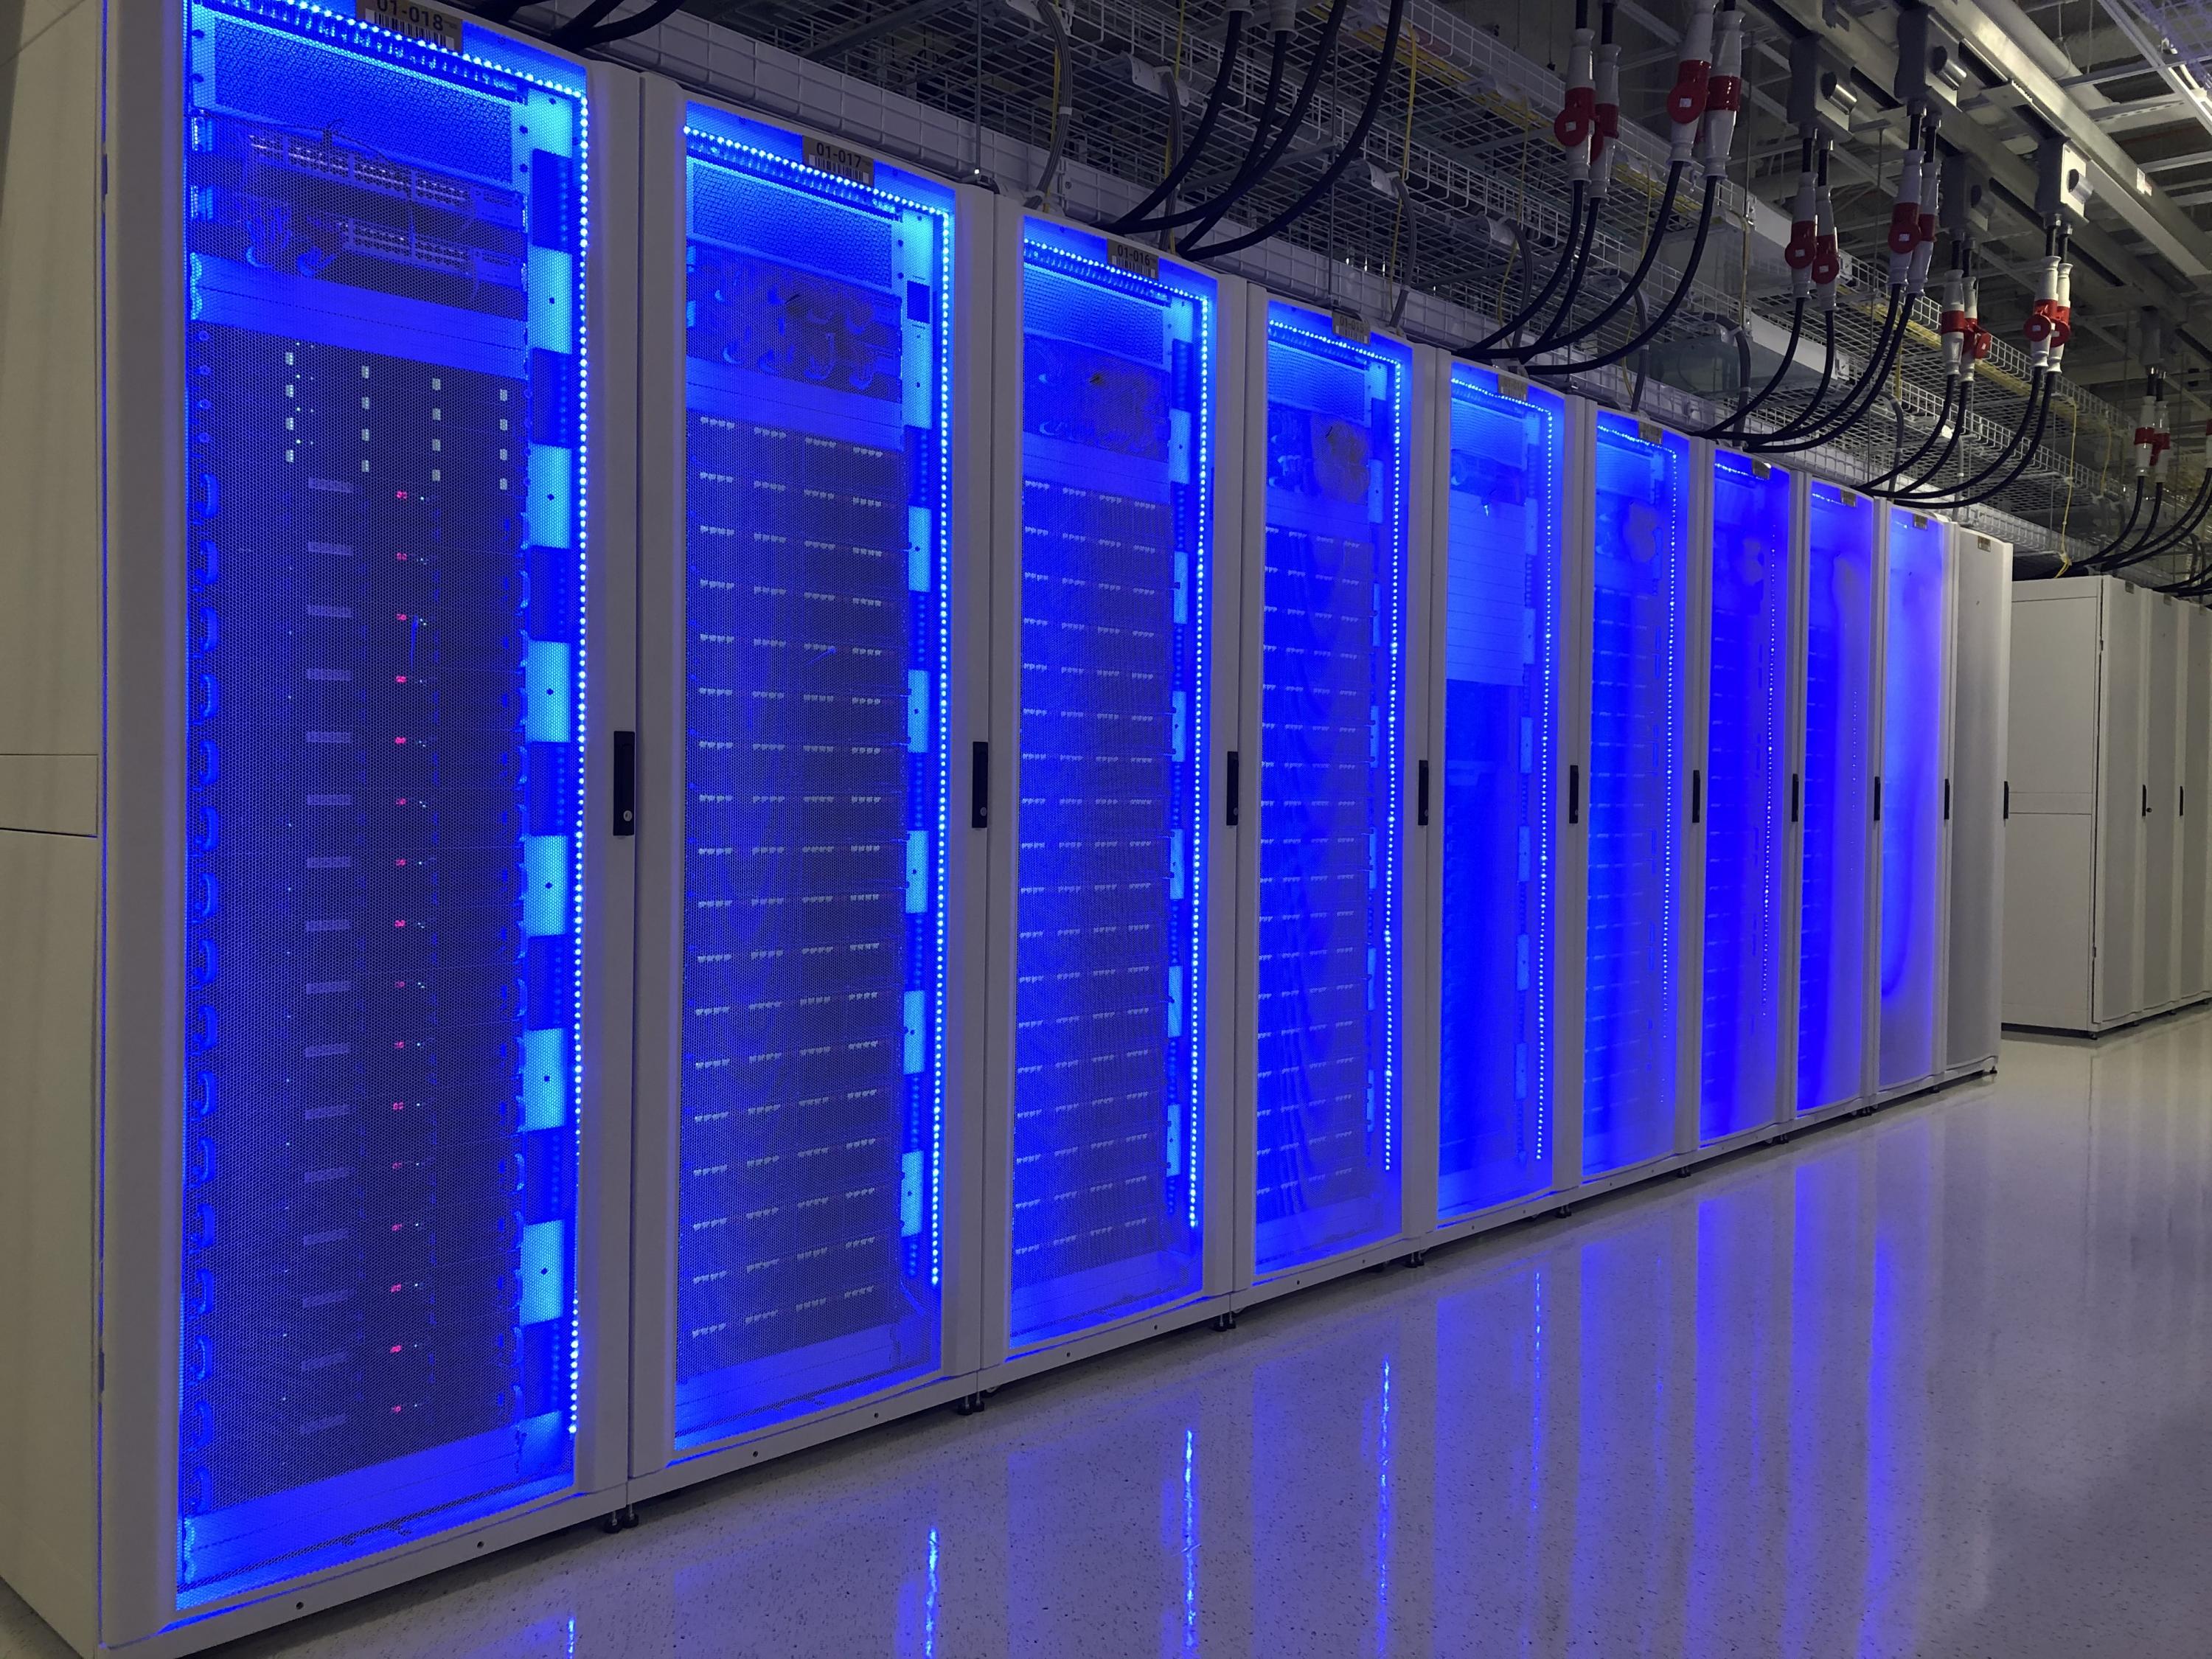 The initial development of AF2Complex was done at the Partnership for an Advanced Computing Environment (PACE) computing center of Georgia Tech, pictured here in the Coda Data Center. Credit: Paul Manno/PACE.